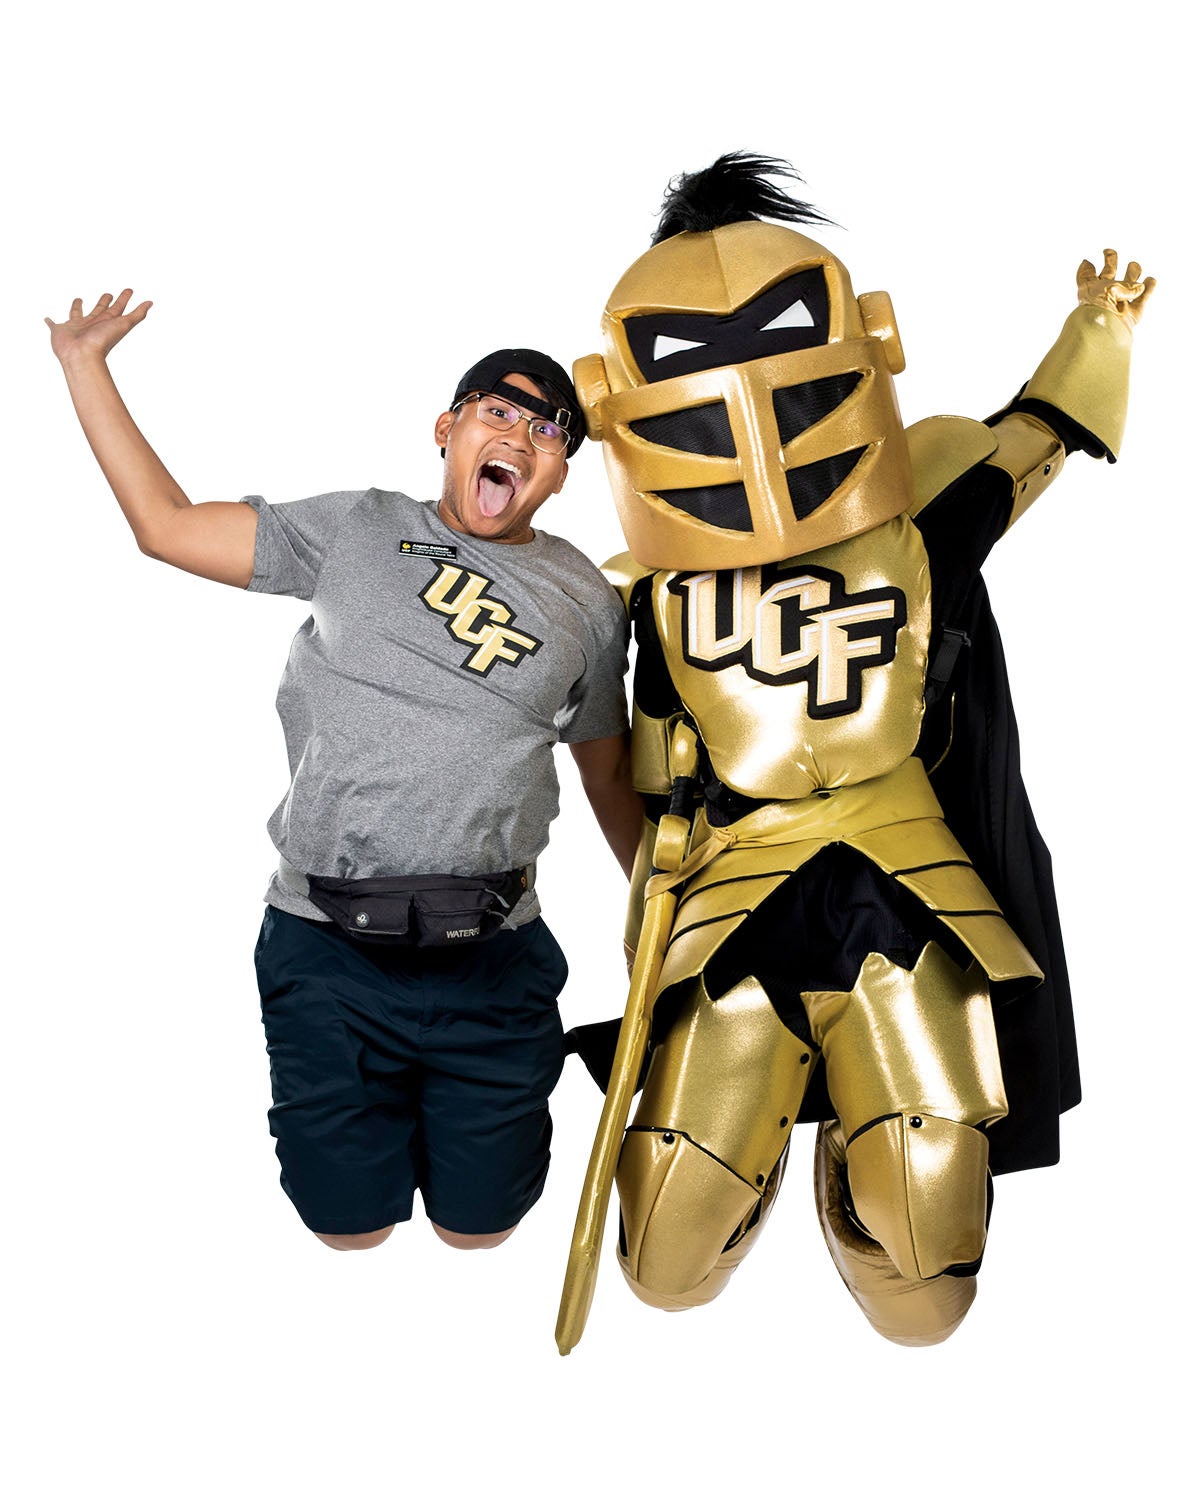 A man wearing a grey UCF shirt jumps in the air along someone in a knight costume.